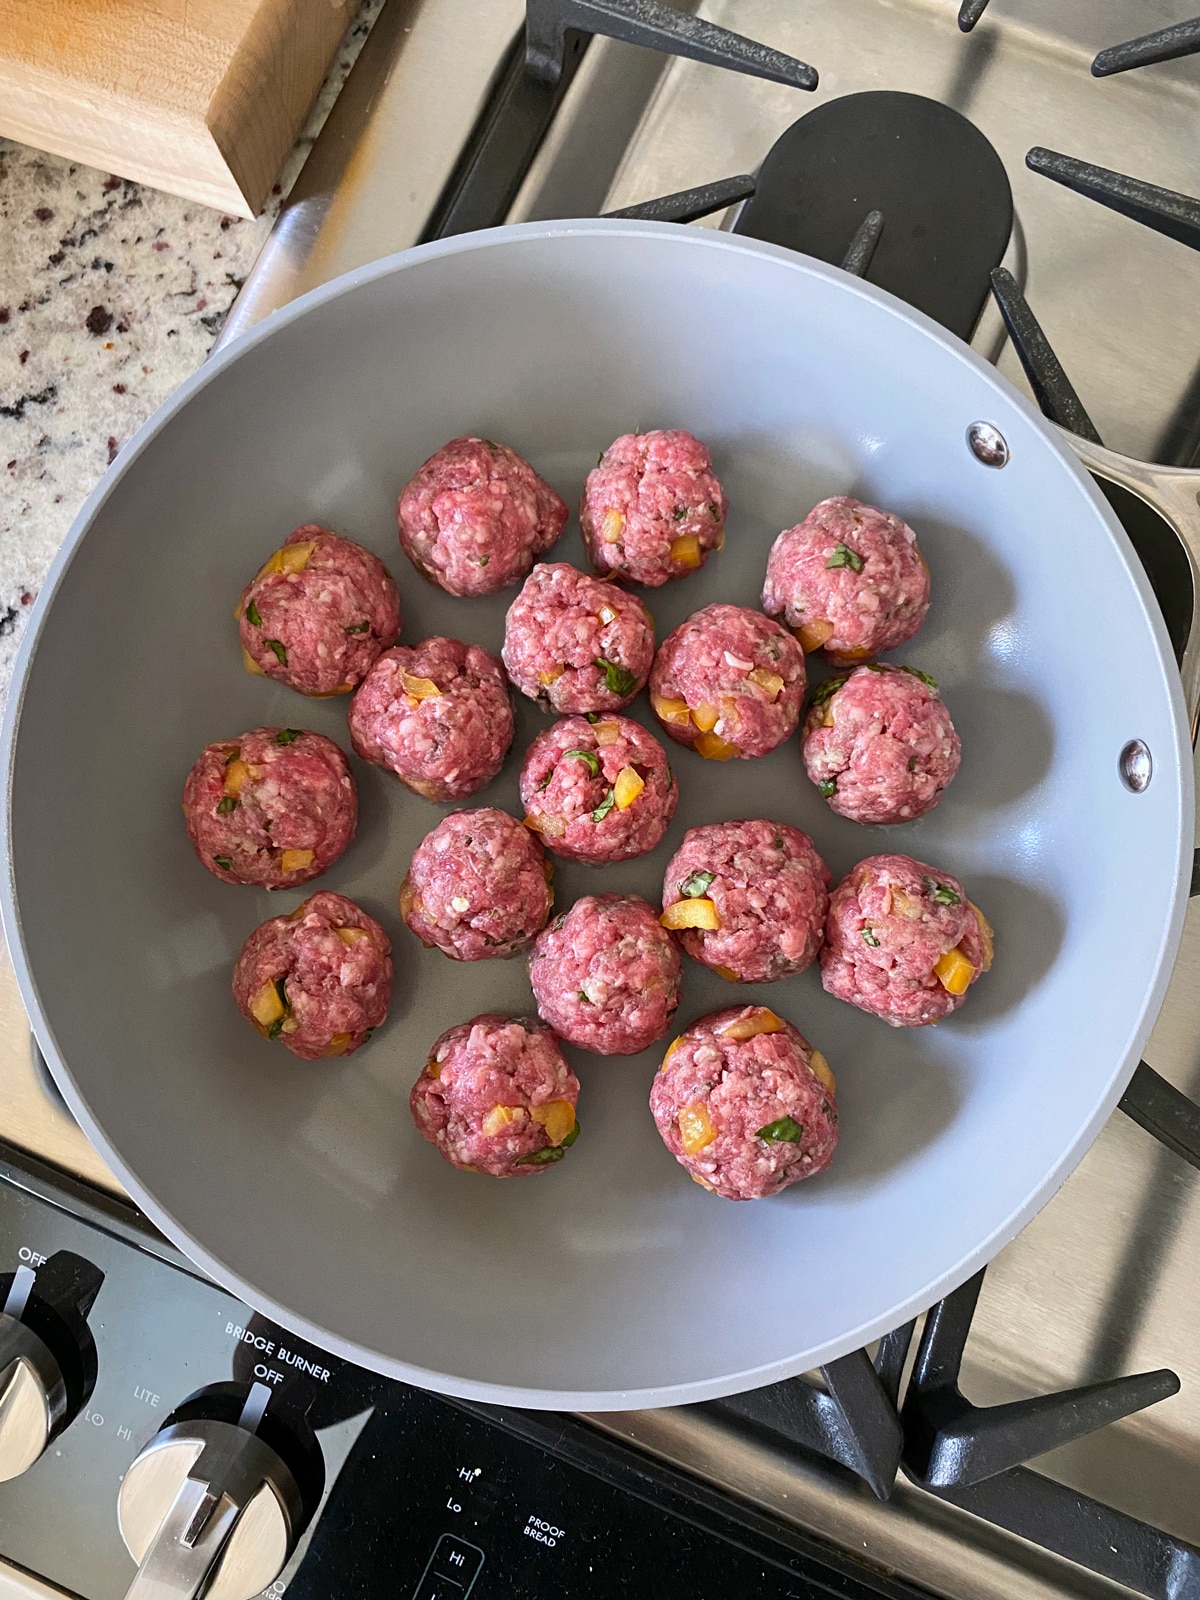 cooking the meatballs on the stove top, in a ceramic pan